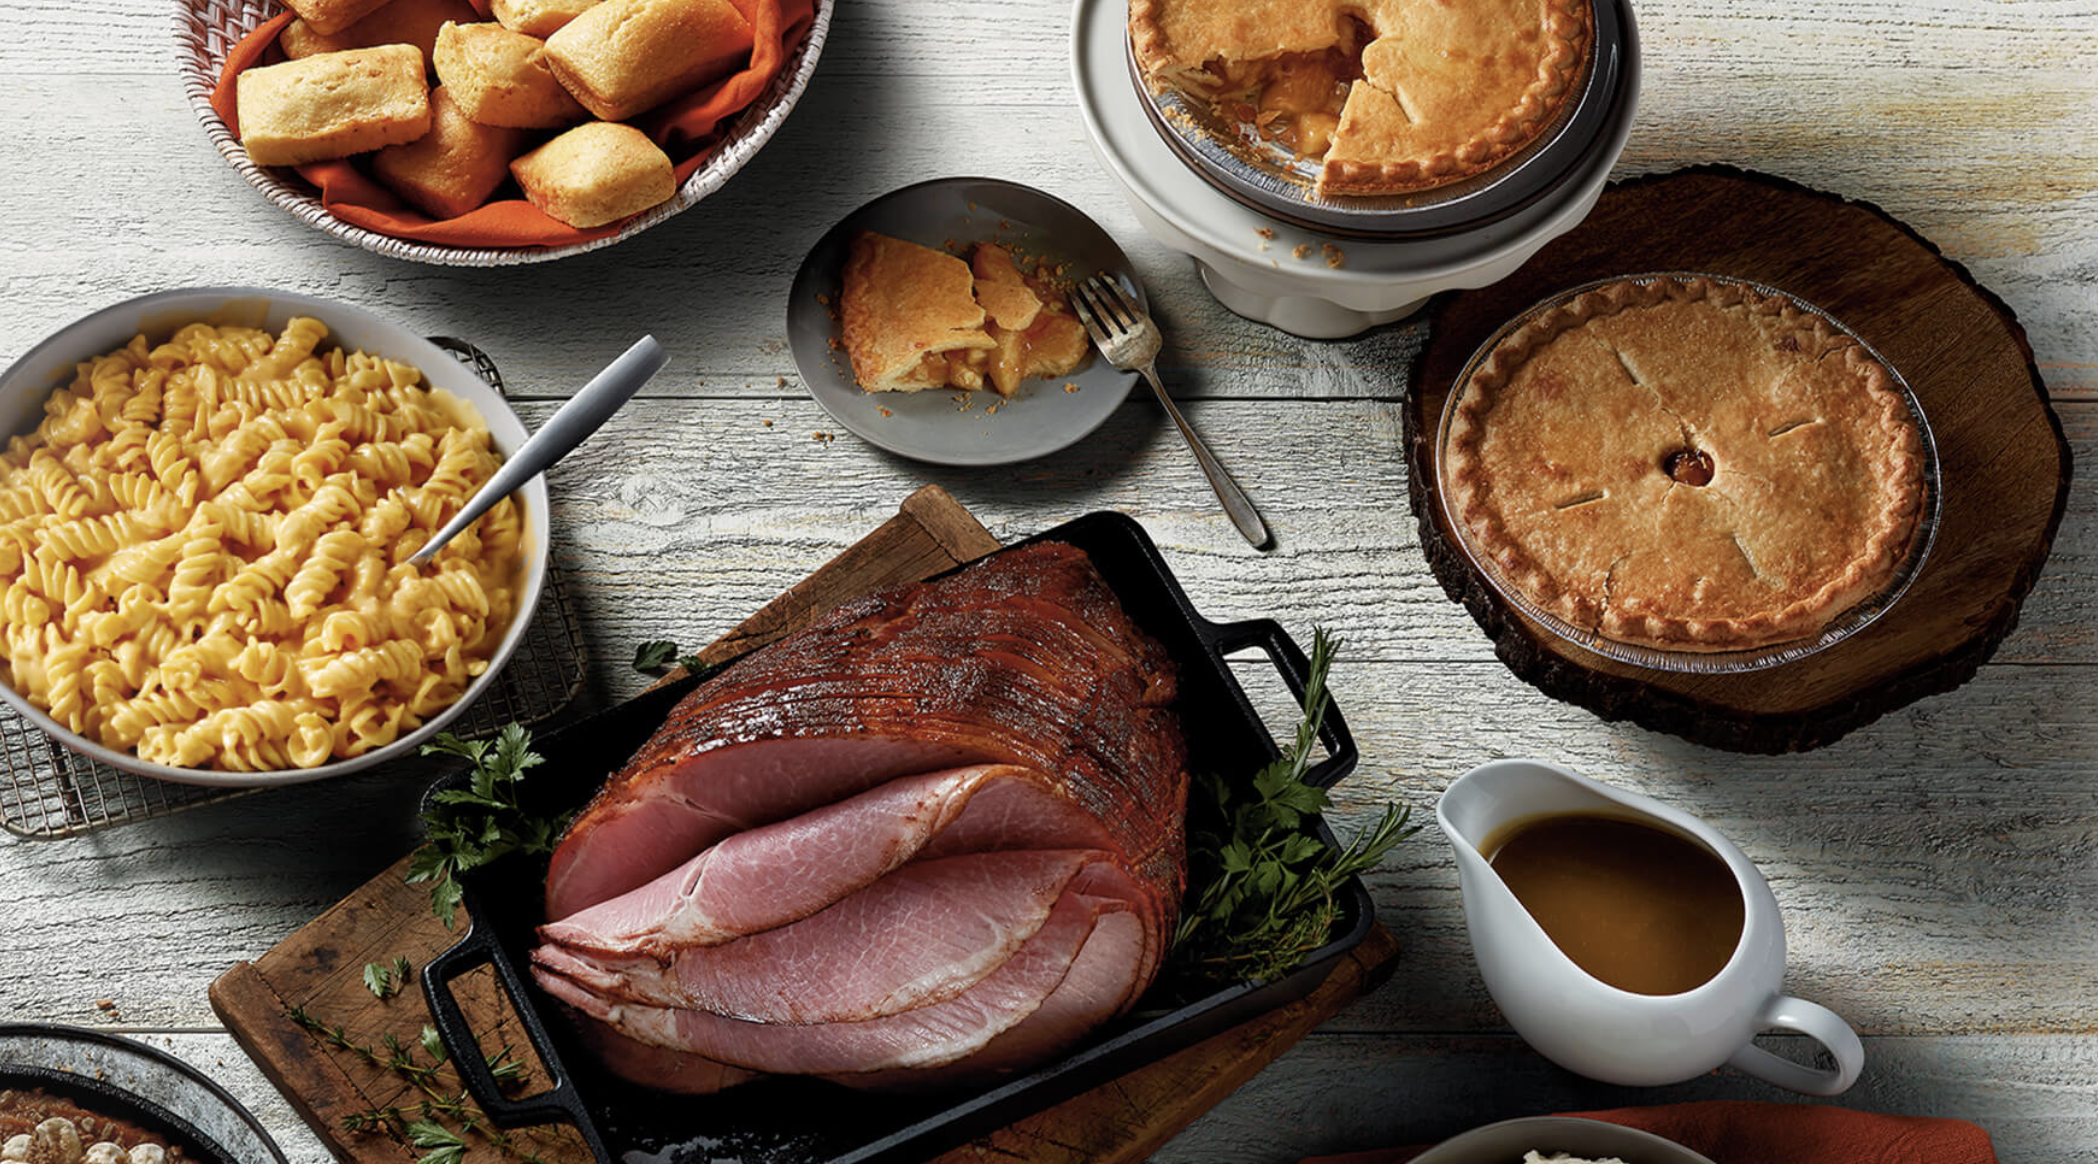 Easter Sunday 2021: How to get prepared meals from Boston Market, Cracker Barrel, The Honey Baked Ham Co., Red Lobster, more - nj.com